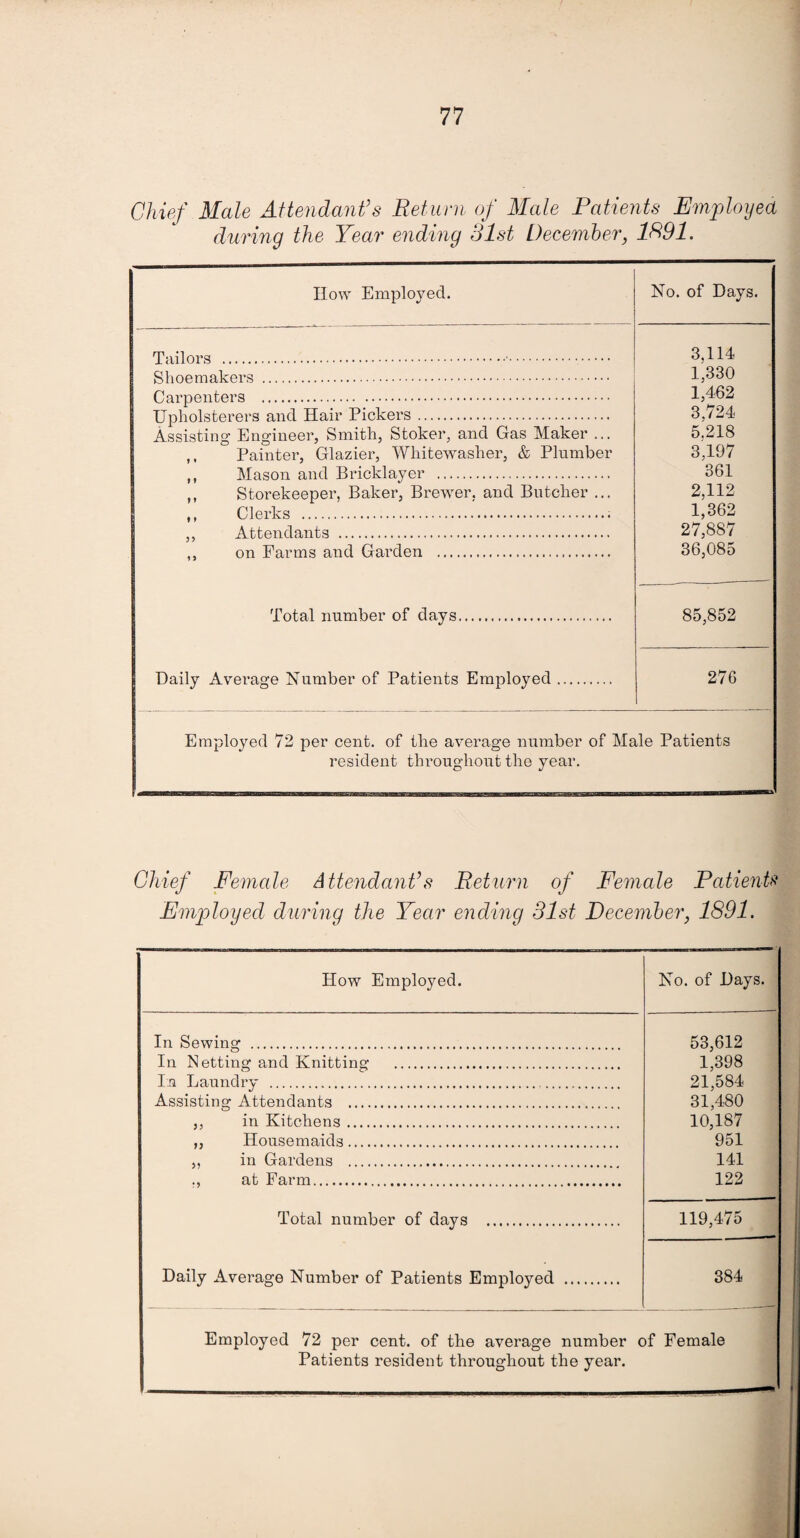 Chief Male Attendant's Return of Male Patients Employed during the Year ending 31st December, 1891. How Employed. No. of Days. Tailors .•. 3,114 Shoemakers . 1,330 Carpenters . 1,462 Upholsterers and Hair Pickers. 3,724 Assisting Engineer, Smith, Stoker, and Gas Maker ... 5.218 Painter, Glazier, Whitewasher, & Plumber 3,197 ,, Mason and Bricklayer . 361 ,, Storekeeper, Baker, Brewer, and Butcher ... 2,112 ,, Clerks .. 1,362 ,, Attendants . 27,887 ,, on Farms and Garden . 36,085 Total number of days... 85,852 Daily Average Number of Patients Employed. 276 Employed 72 per cent, of the average number of Male Patients resident throughout the year. Chief Female Attendant's Return of Female Patients Employed during the Year ending 31st December, 1891. How Employed. No. of Days. In Sewing ... 53,612 In Netting and Knitting . 1,398 In Laundry . 21,584 Assisting Attendants . 31,480 ,. in Kitchens. 10,187 ,, Housemaids. 951 „ in Gardens . 141 ., at Farm. 122 Total number of days . 119,475 Daily Average Number of Patients Employed . 384 Employed 72 per cent, of the average number of Female Patients resident throughout the year.